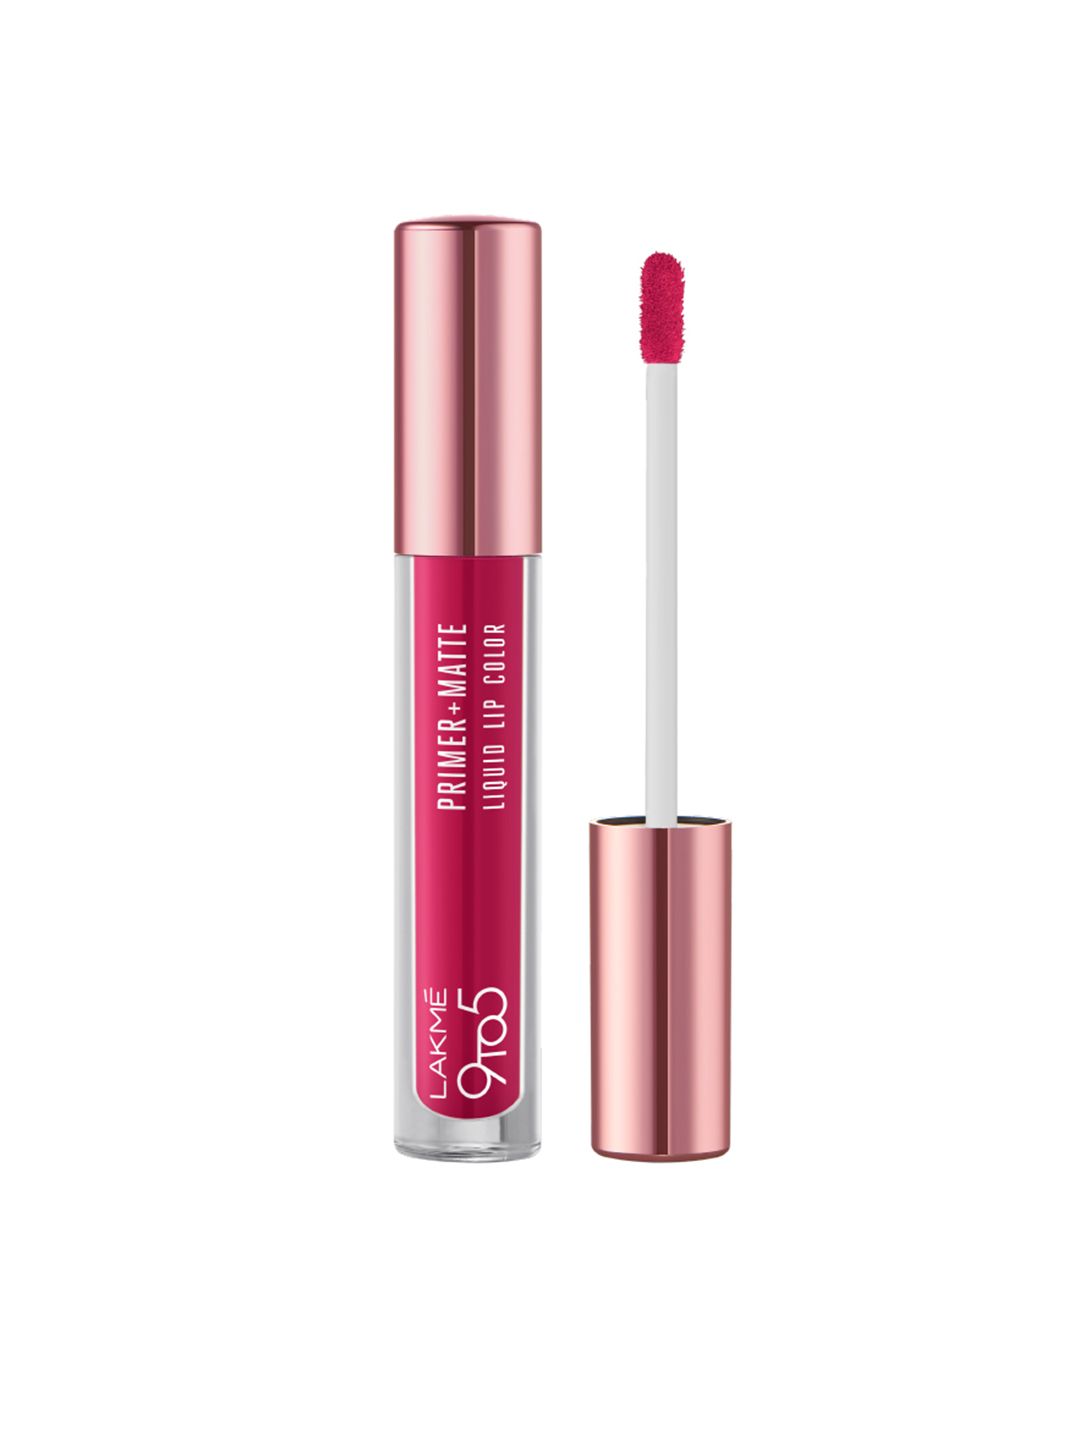 Lakme 9 to 5 Primer+Matte Liquid Lip Color with Vit- E and Argan Oil 4.2ml-Power Pink MP2 Price in India